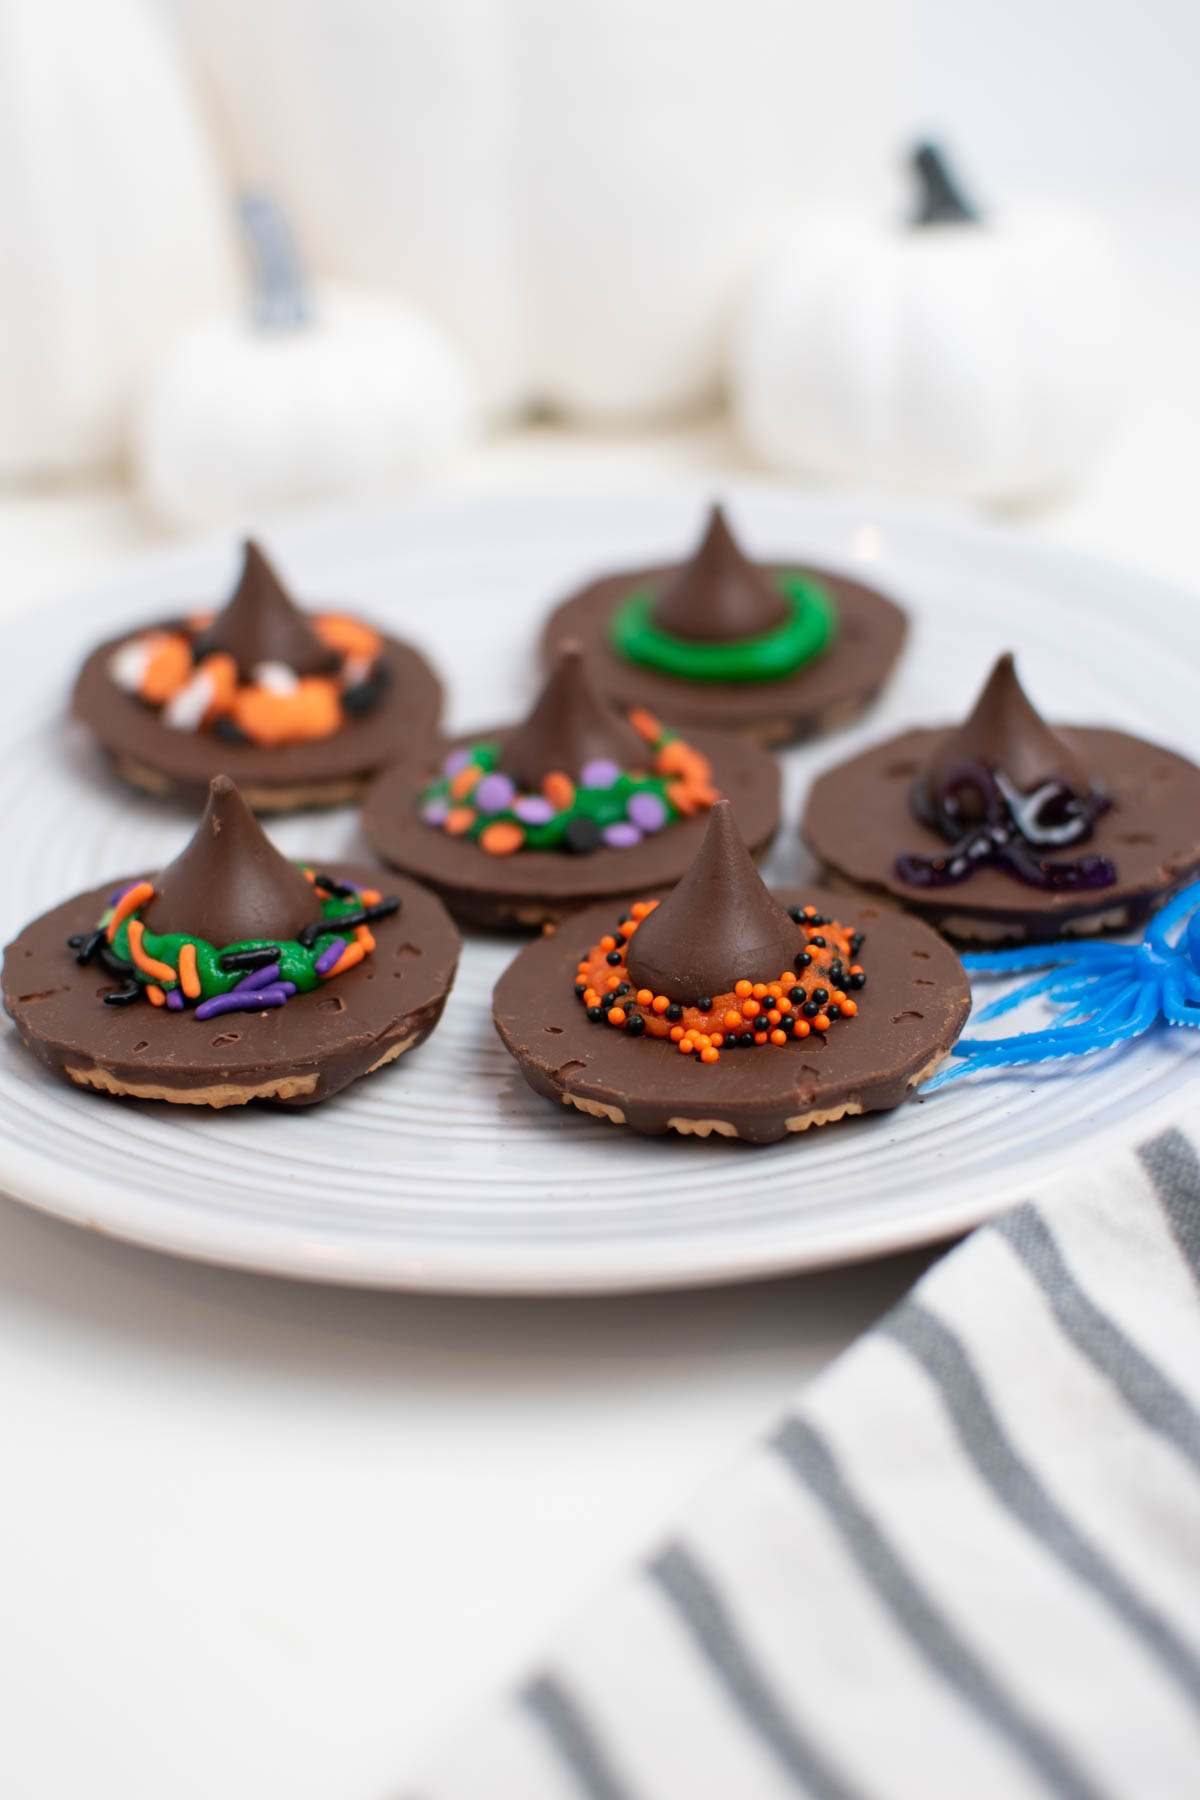 Six fudge stripes witch hat cookies with sprinkle decorations on white plate.